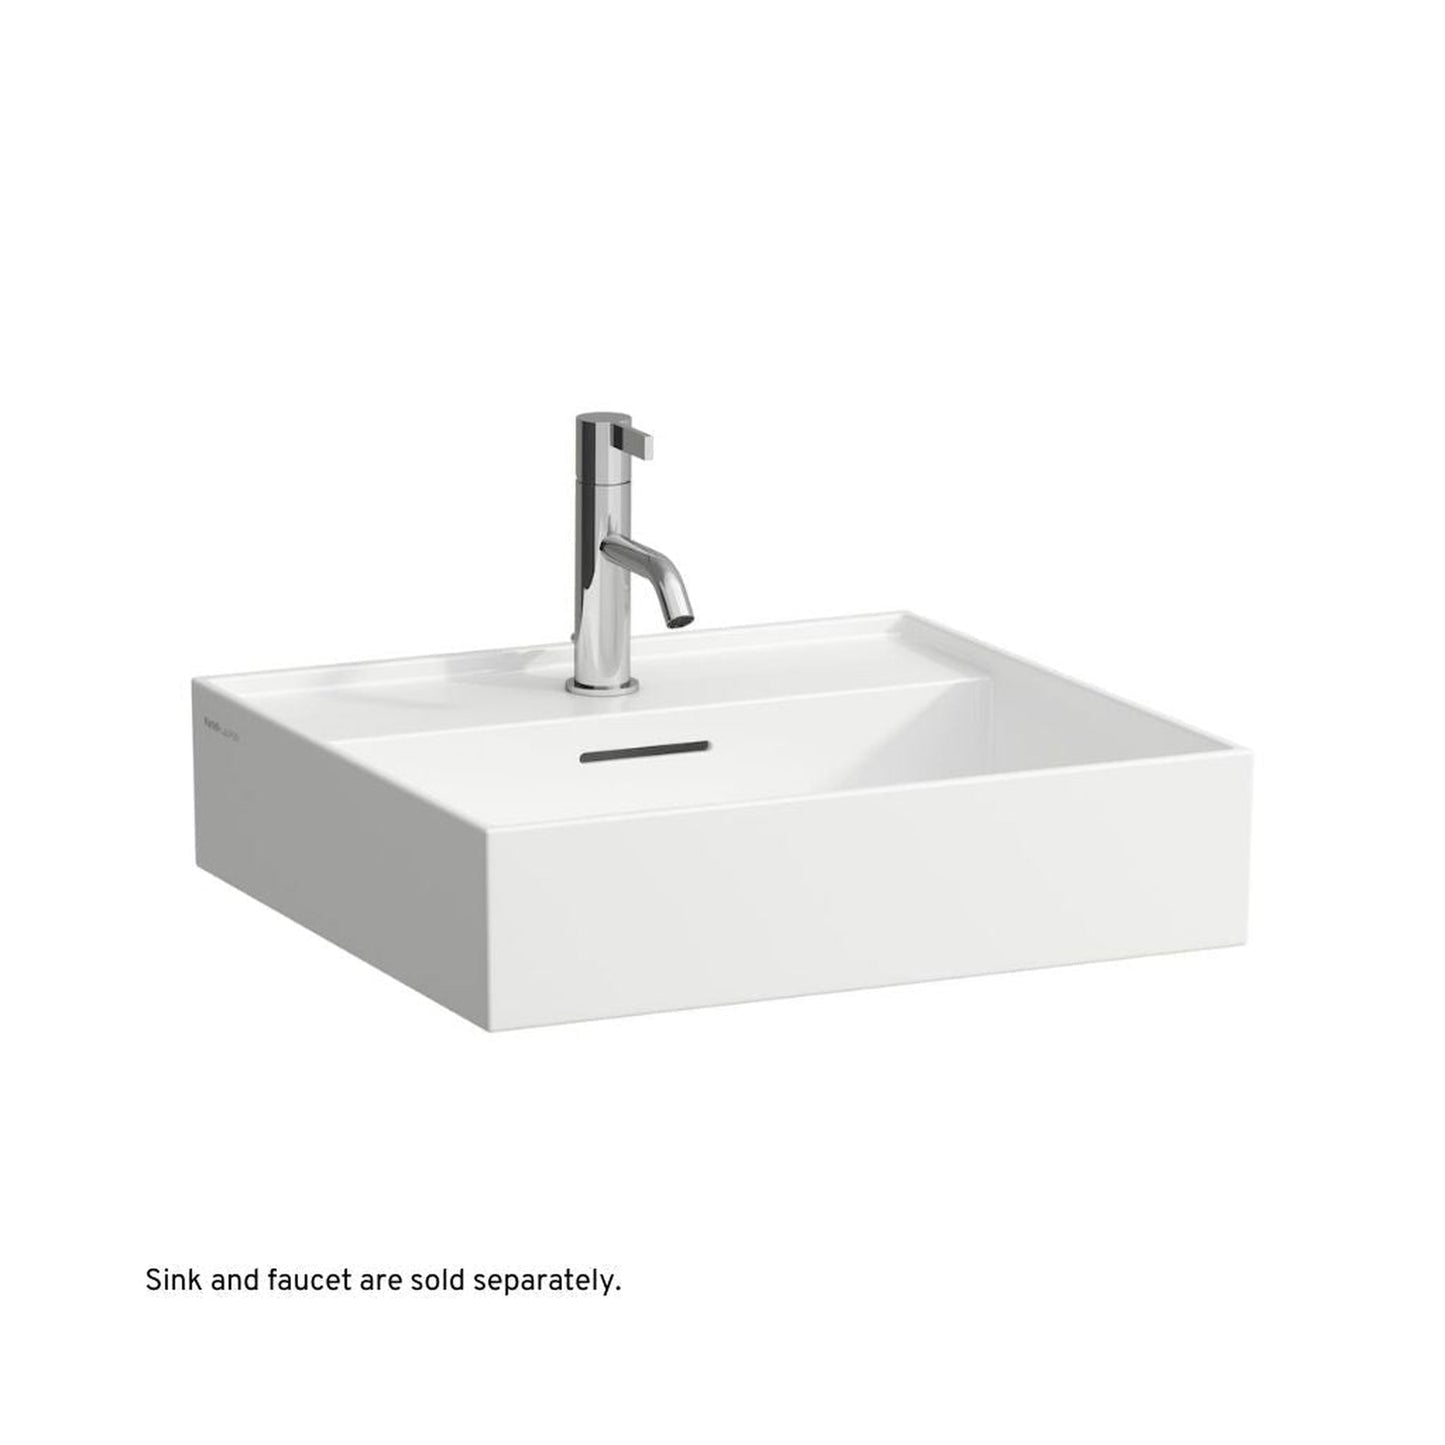 Laufen Kartell 20" x 18" Matte White Wall-Mounted Bathroom Sink With Faucet Hole